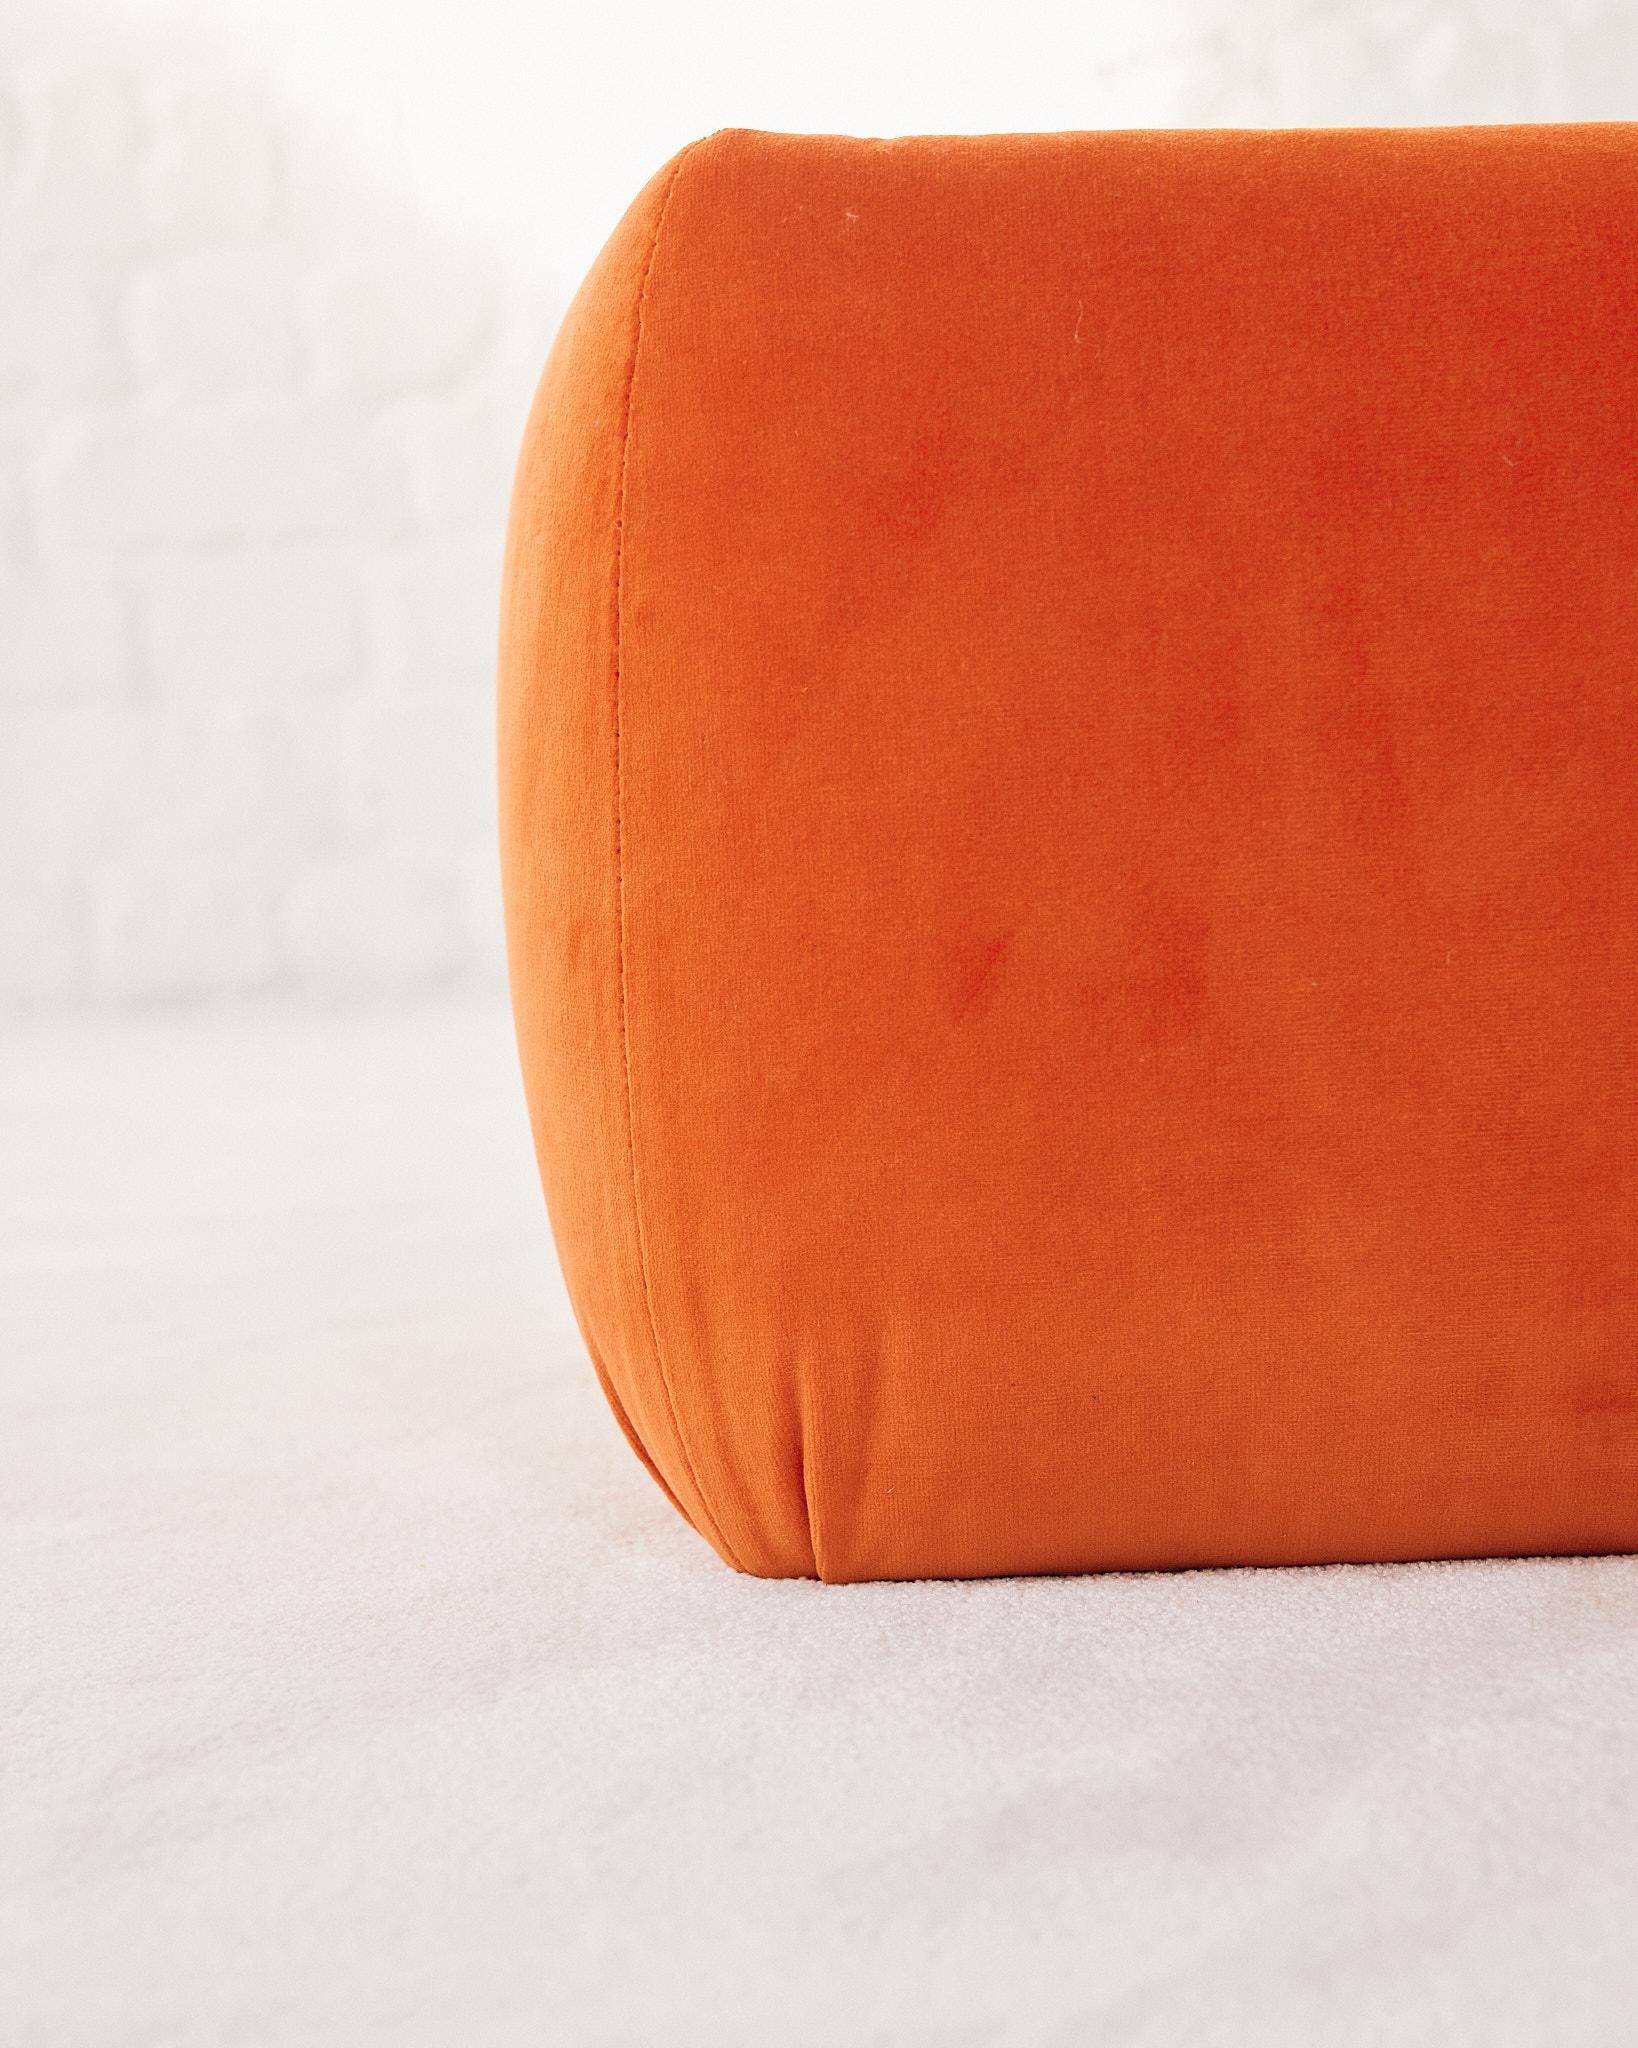 Unique side tables reupholstered in an orange velvet material, with a top aluminium surface. The tables are in style of Roche Bobois.